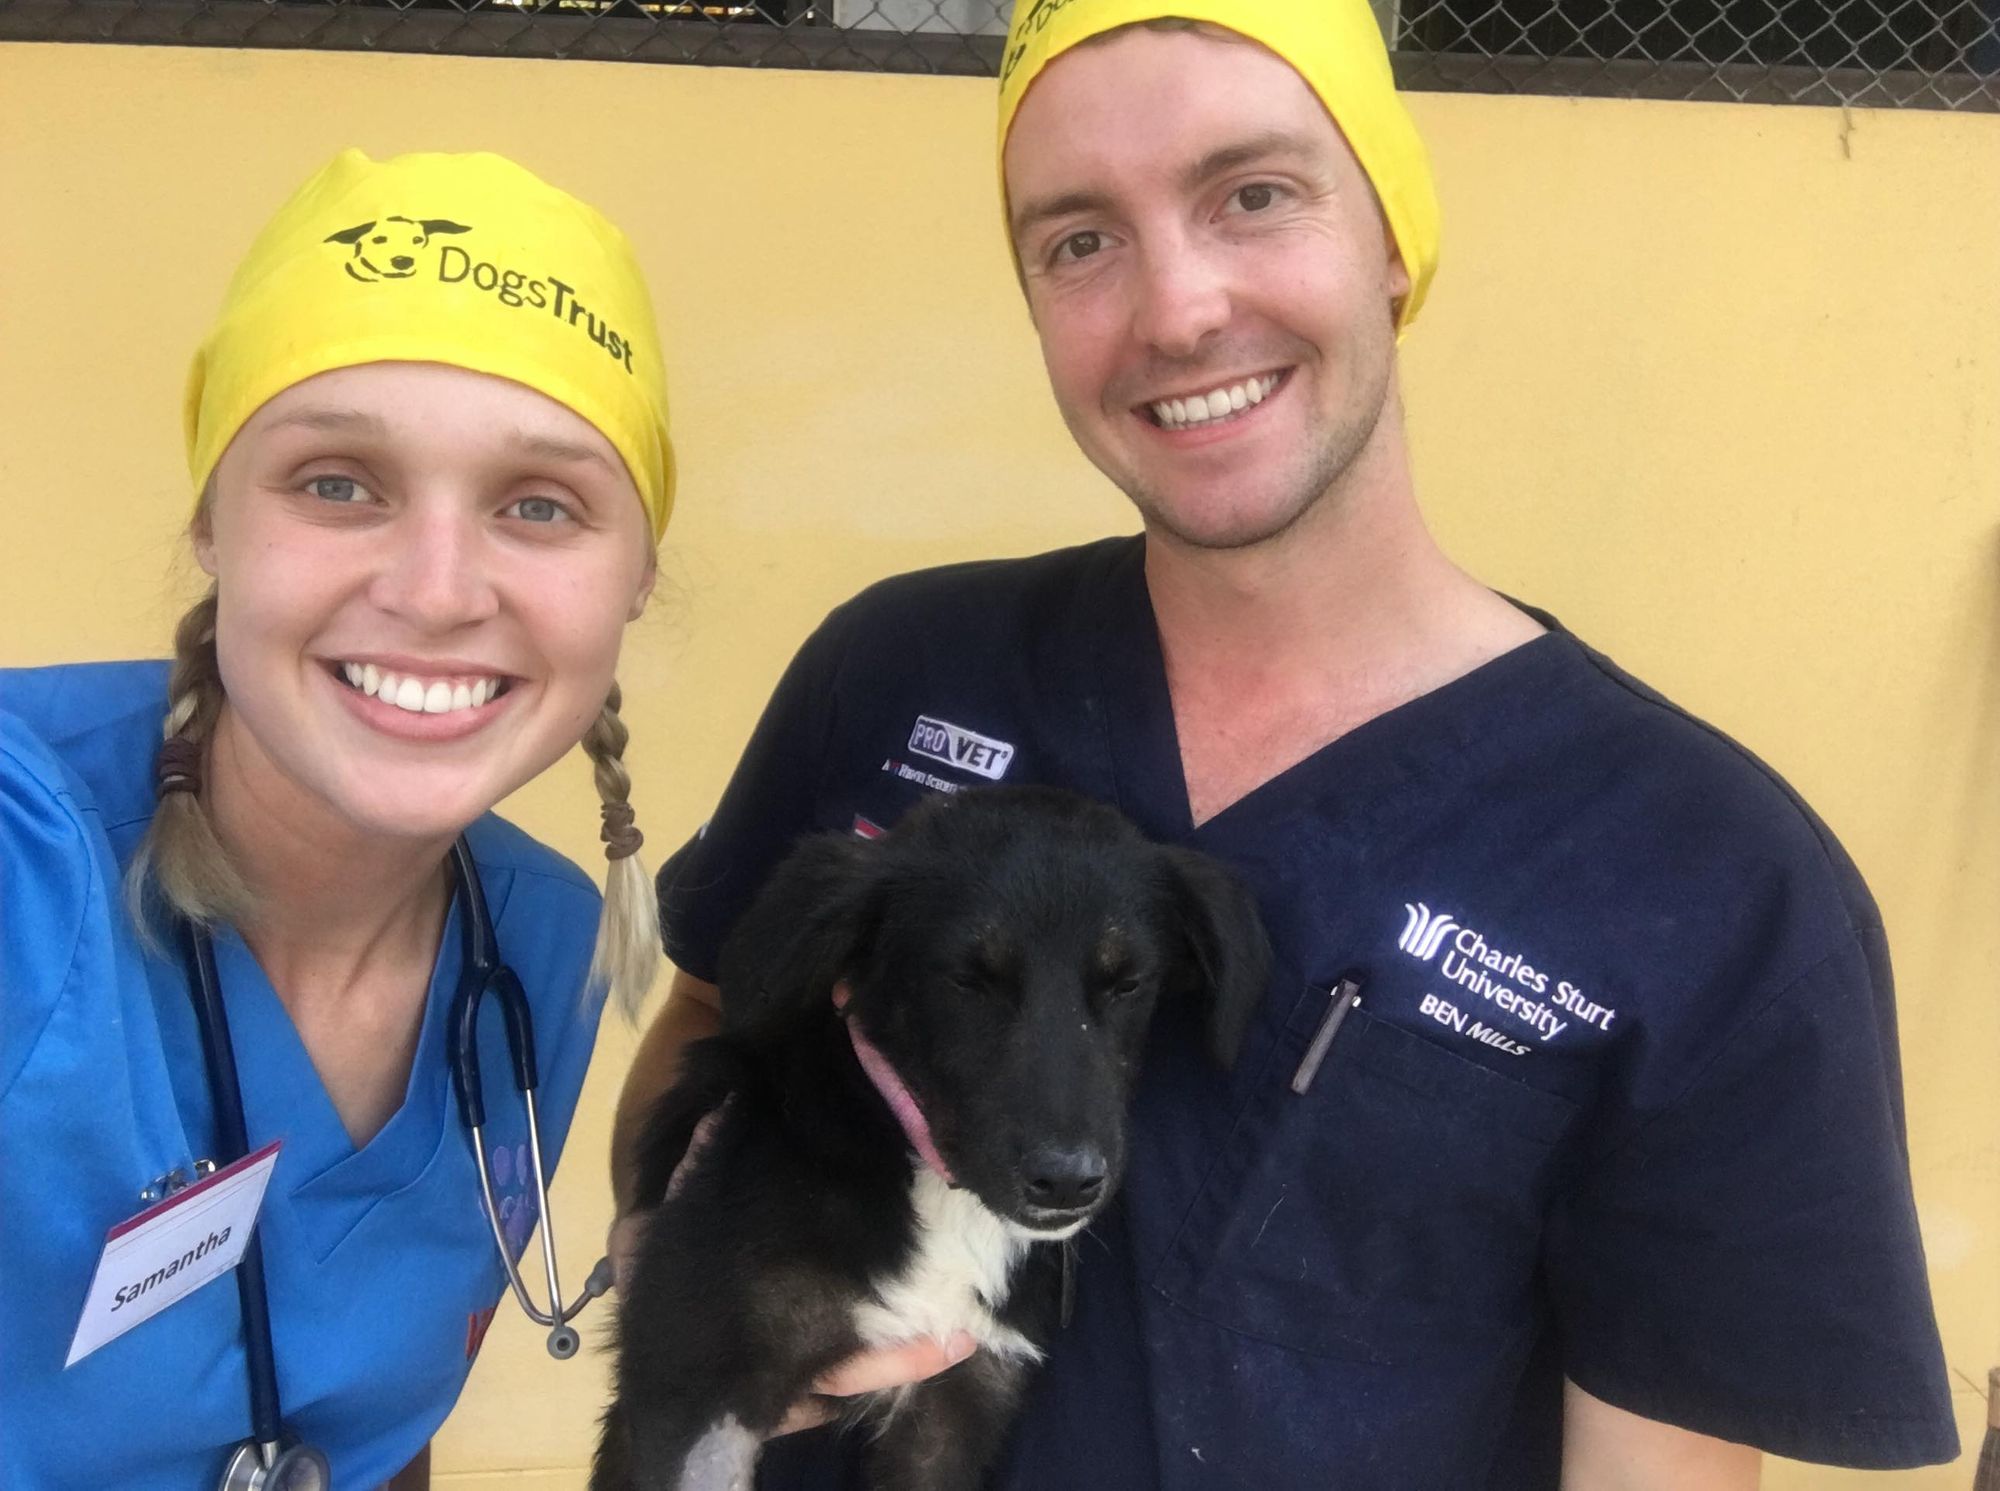 Surgical Training in Thailand: A veterinary student from Australia's experience